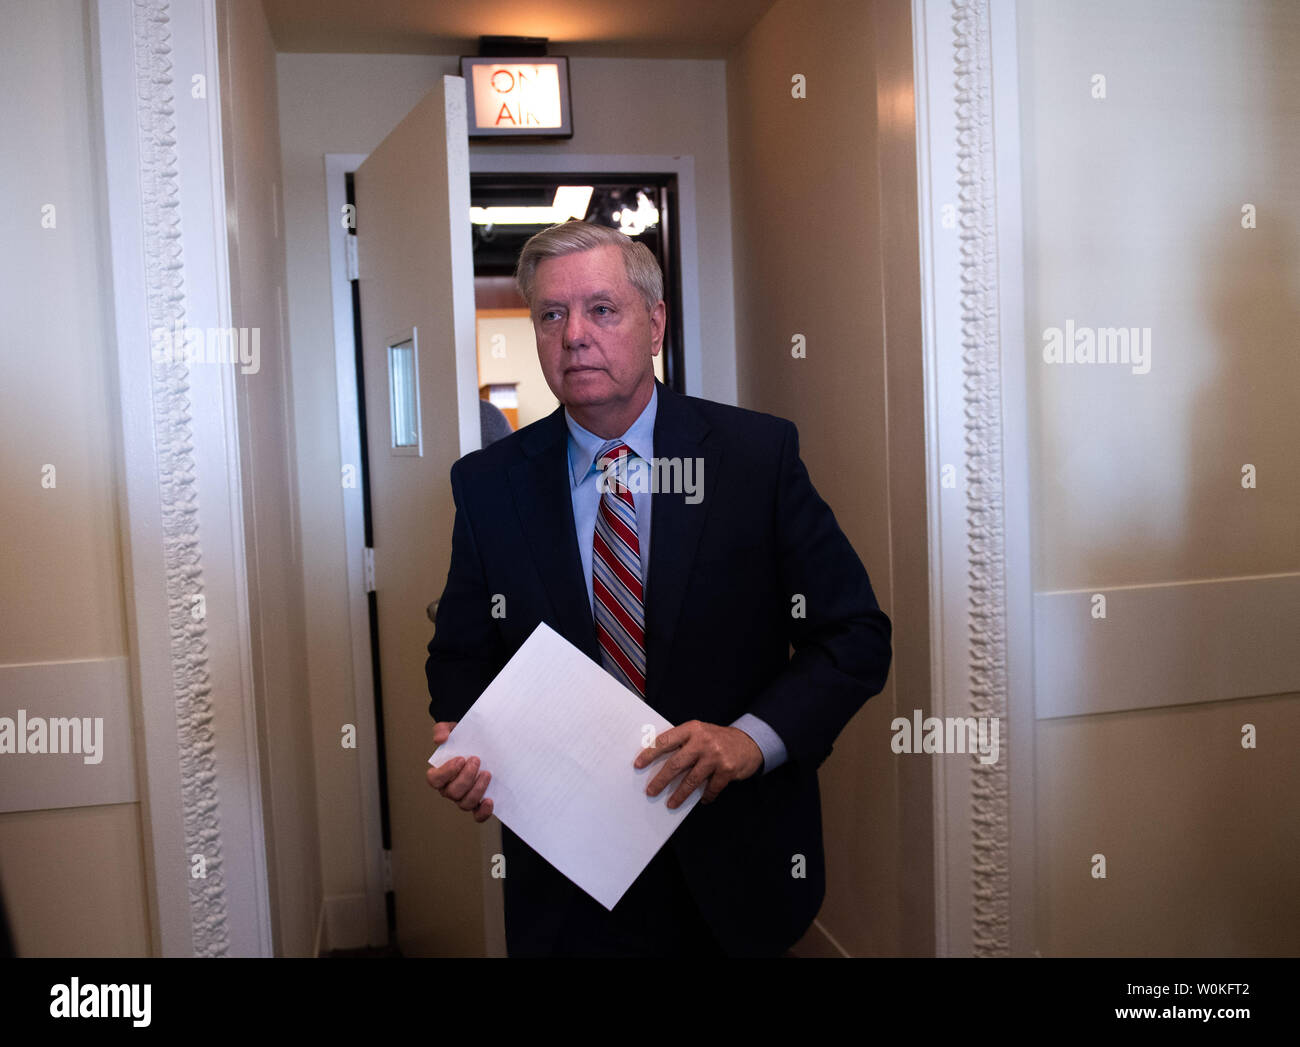 Sen. Lindsey Graham, R-S.C., leaves after speaking to the media on Special Counsel Robert Mueller's report into potential collusion between the Trump campaign and Russia, on Capitol Hill in Washington, D.C. on March 25 2019. The Muller Report was released to the Justice Department on Friday and, according to a letter released by Attorney General Barr, said there was no evidence that the Trump campaign conspired or coordinated with Russia in the 2016 presidential election. Photo by Kevin Dietsch/UPI Stock Photo